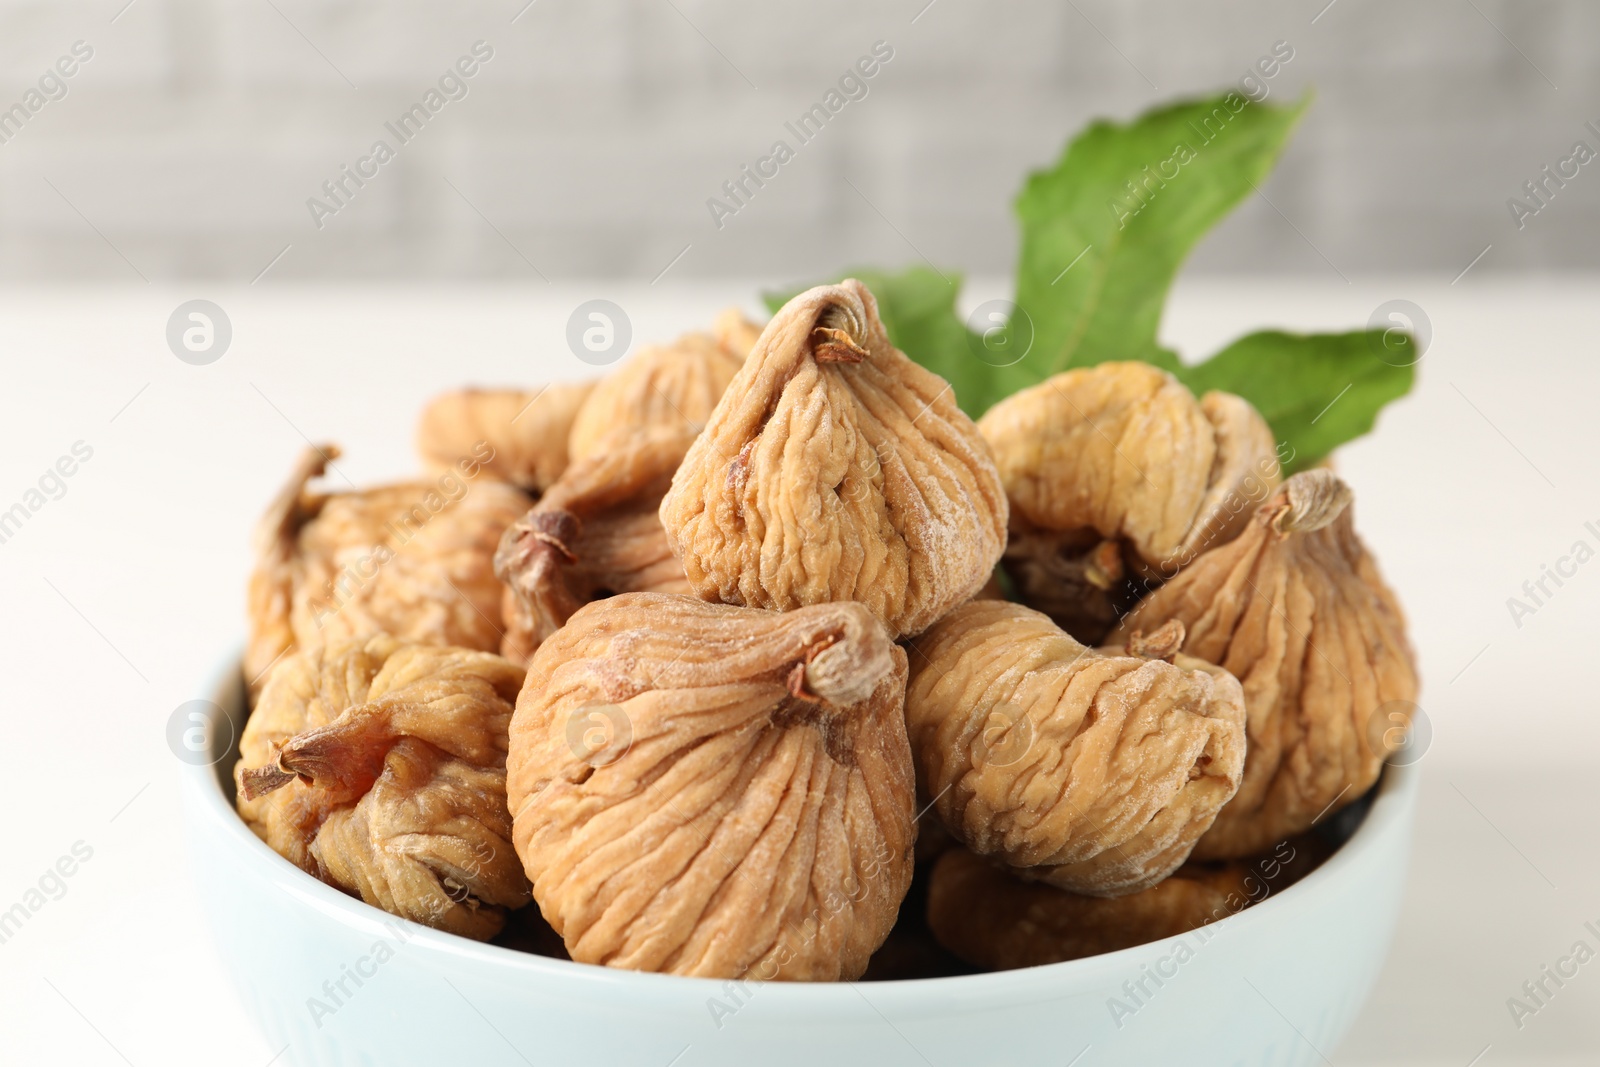 Photo of Bowl with tasty dried figs and green leaf on white table, closeup